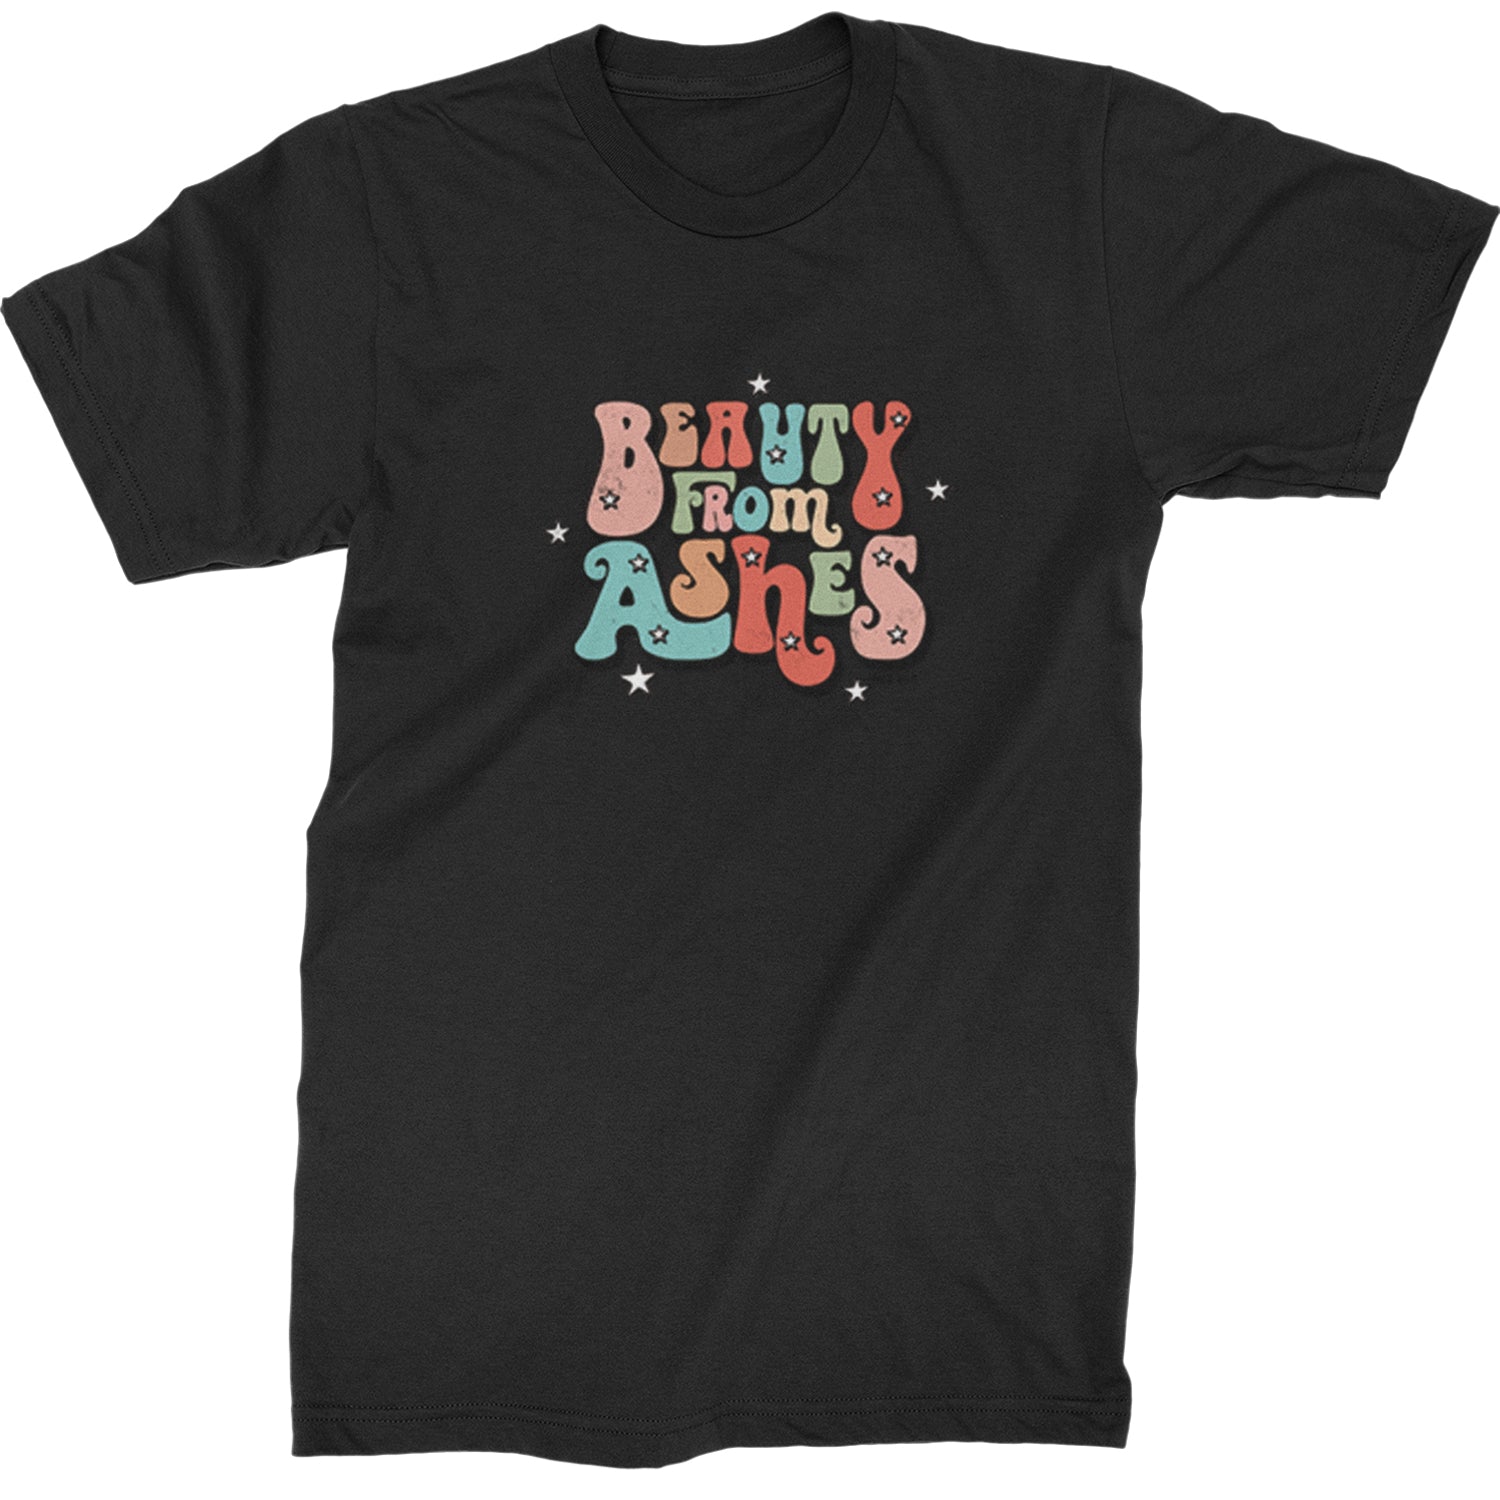 Beauty From Ashes Mens T-shirt